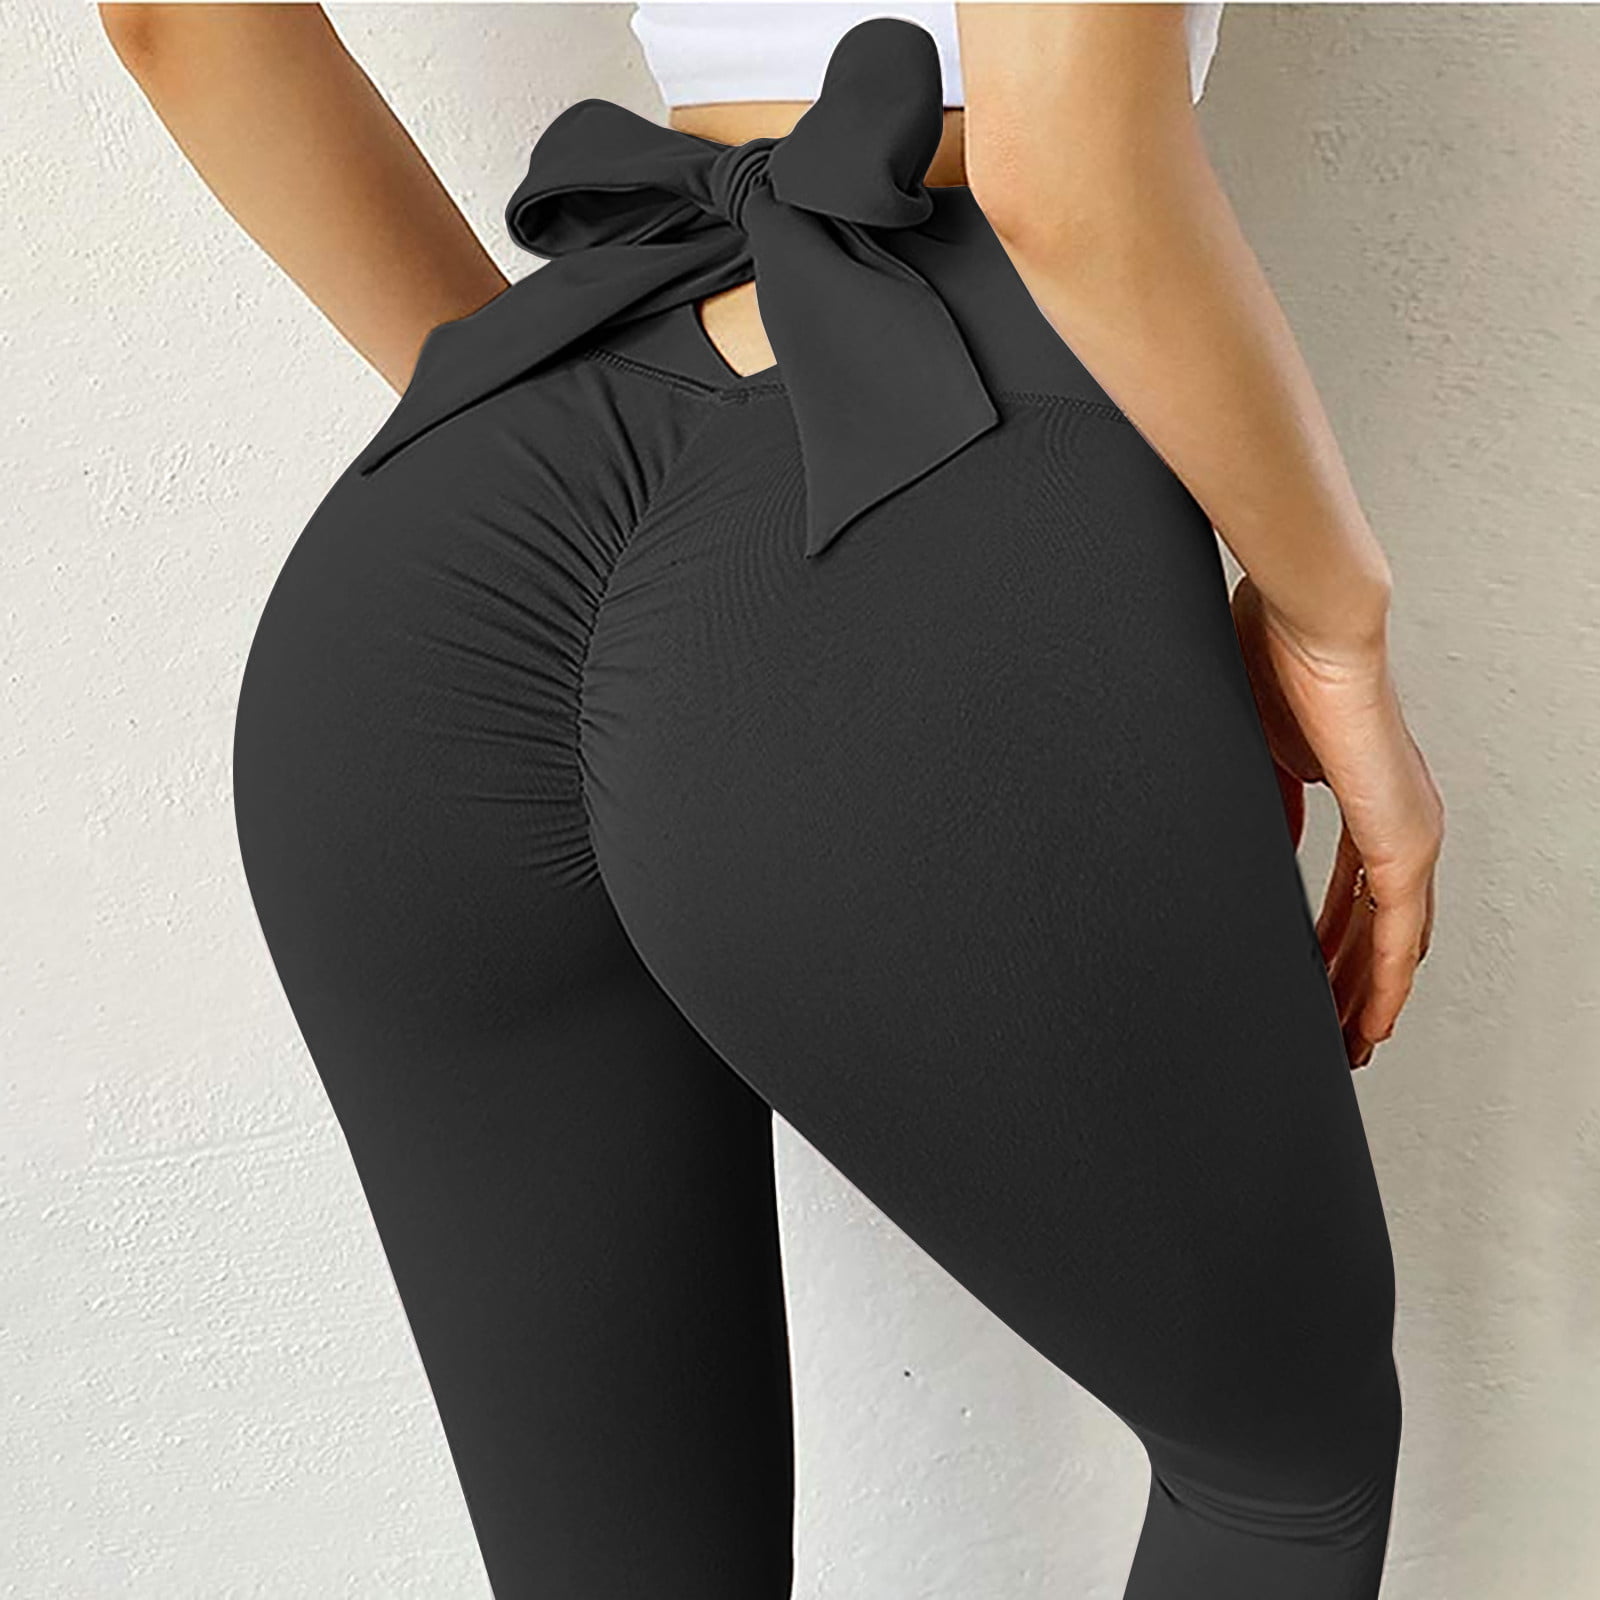 Abcnature Yoga Pants for Women with Pockets, High Waisted